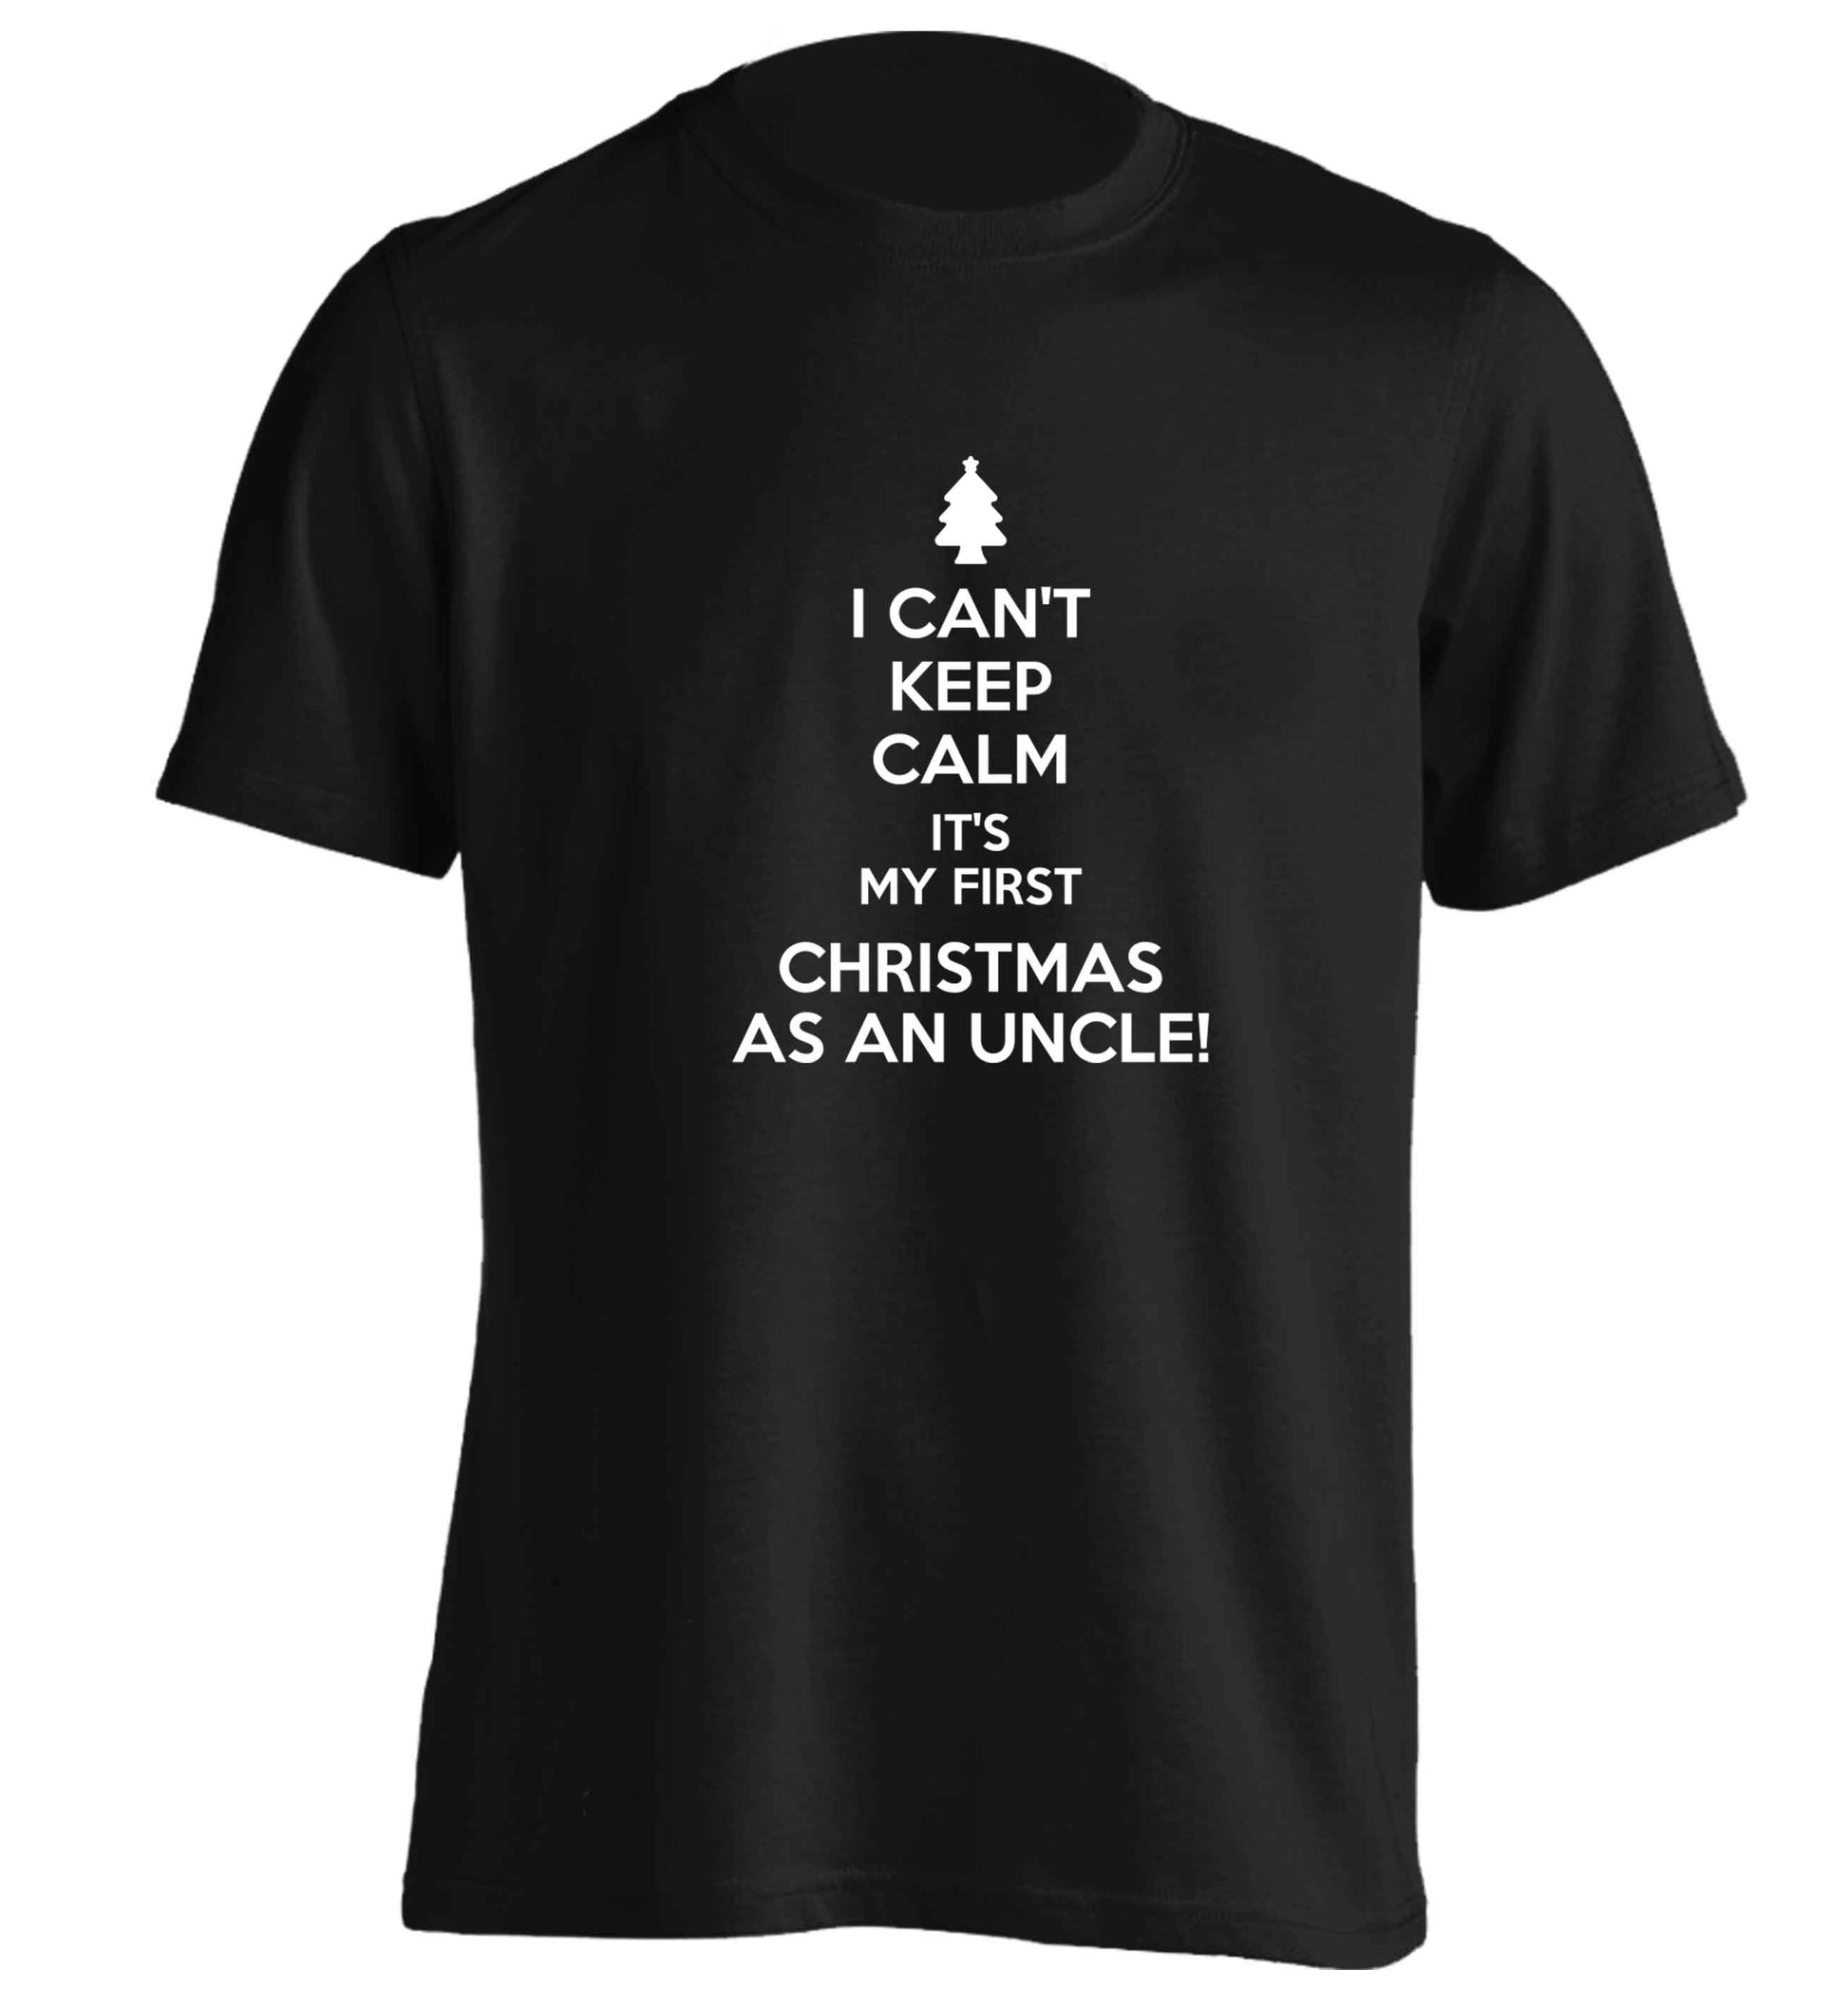 I can't keep calm it's my first Christmas as an uncle! adults unisex black Tshirt 2XL